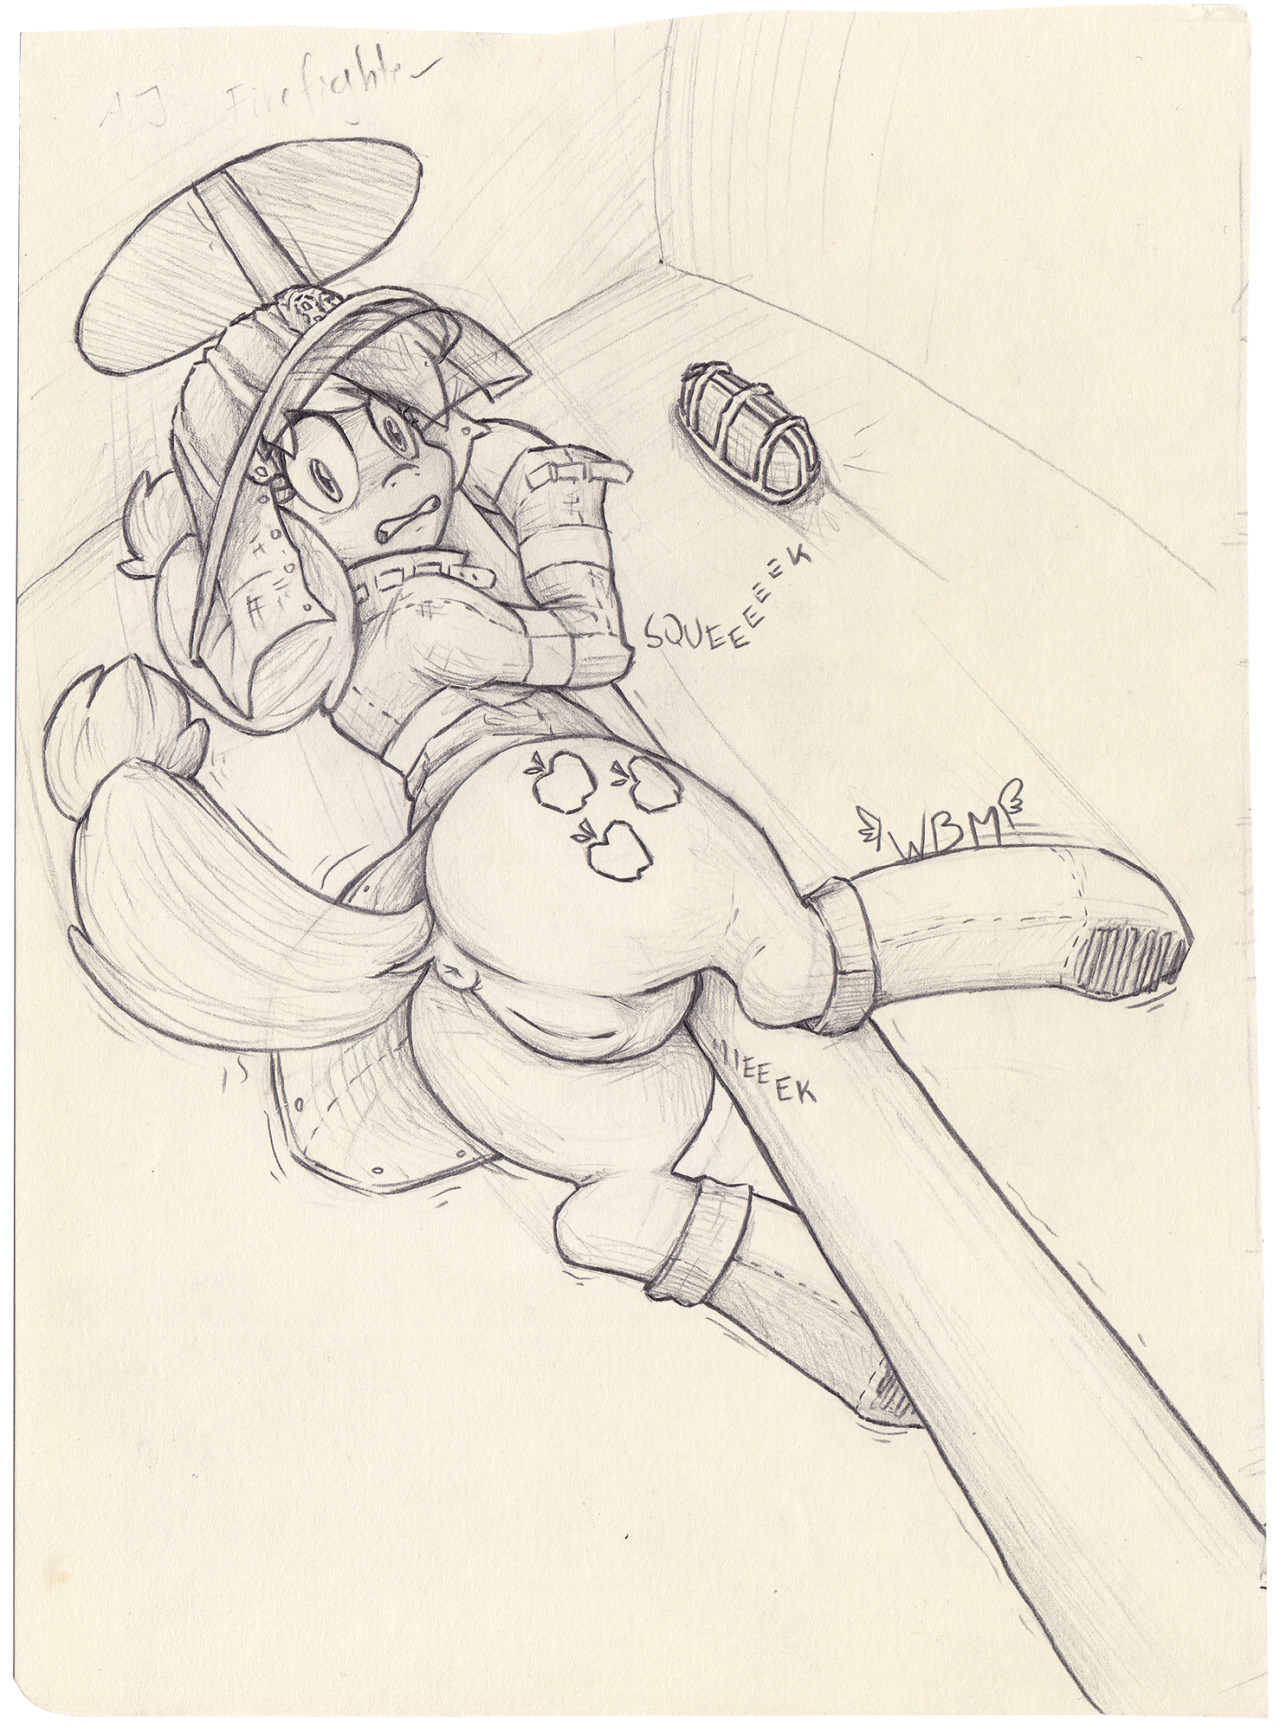 Traditional Art Auction Day 11 | PONYTAILS - Applejack I will scan the pieces from